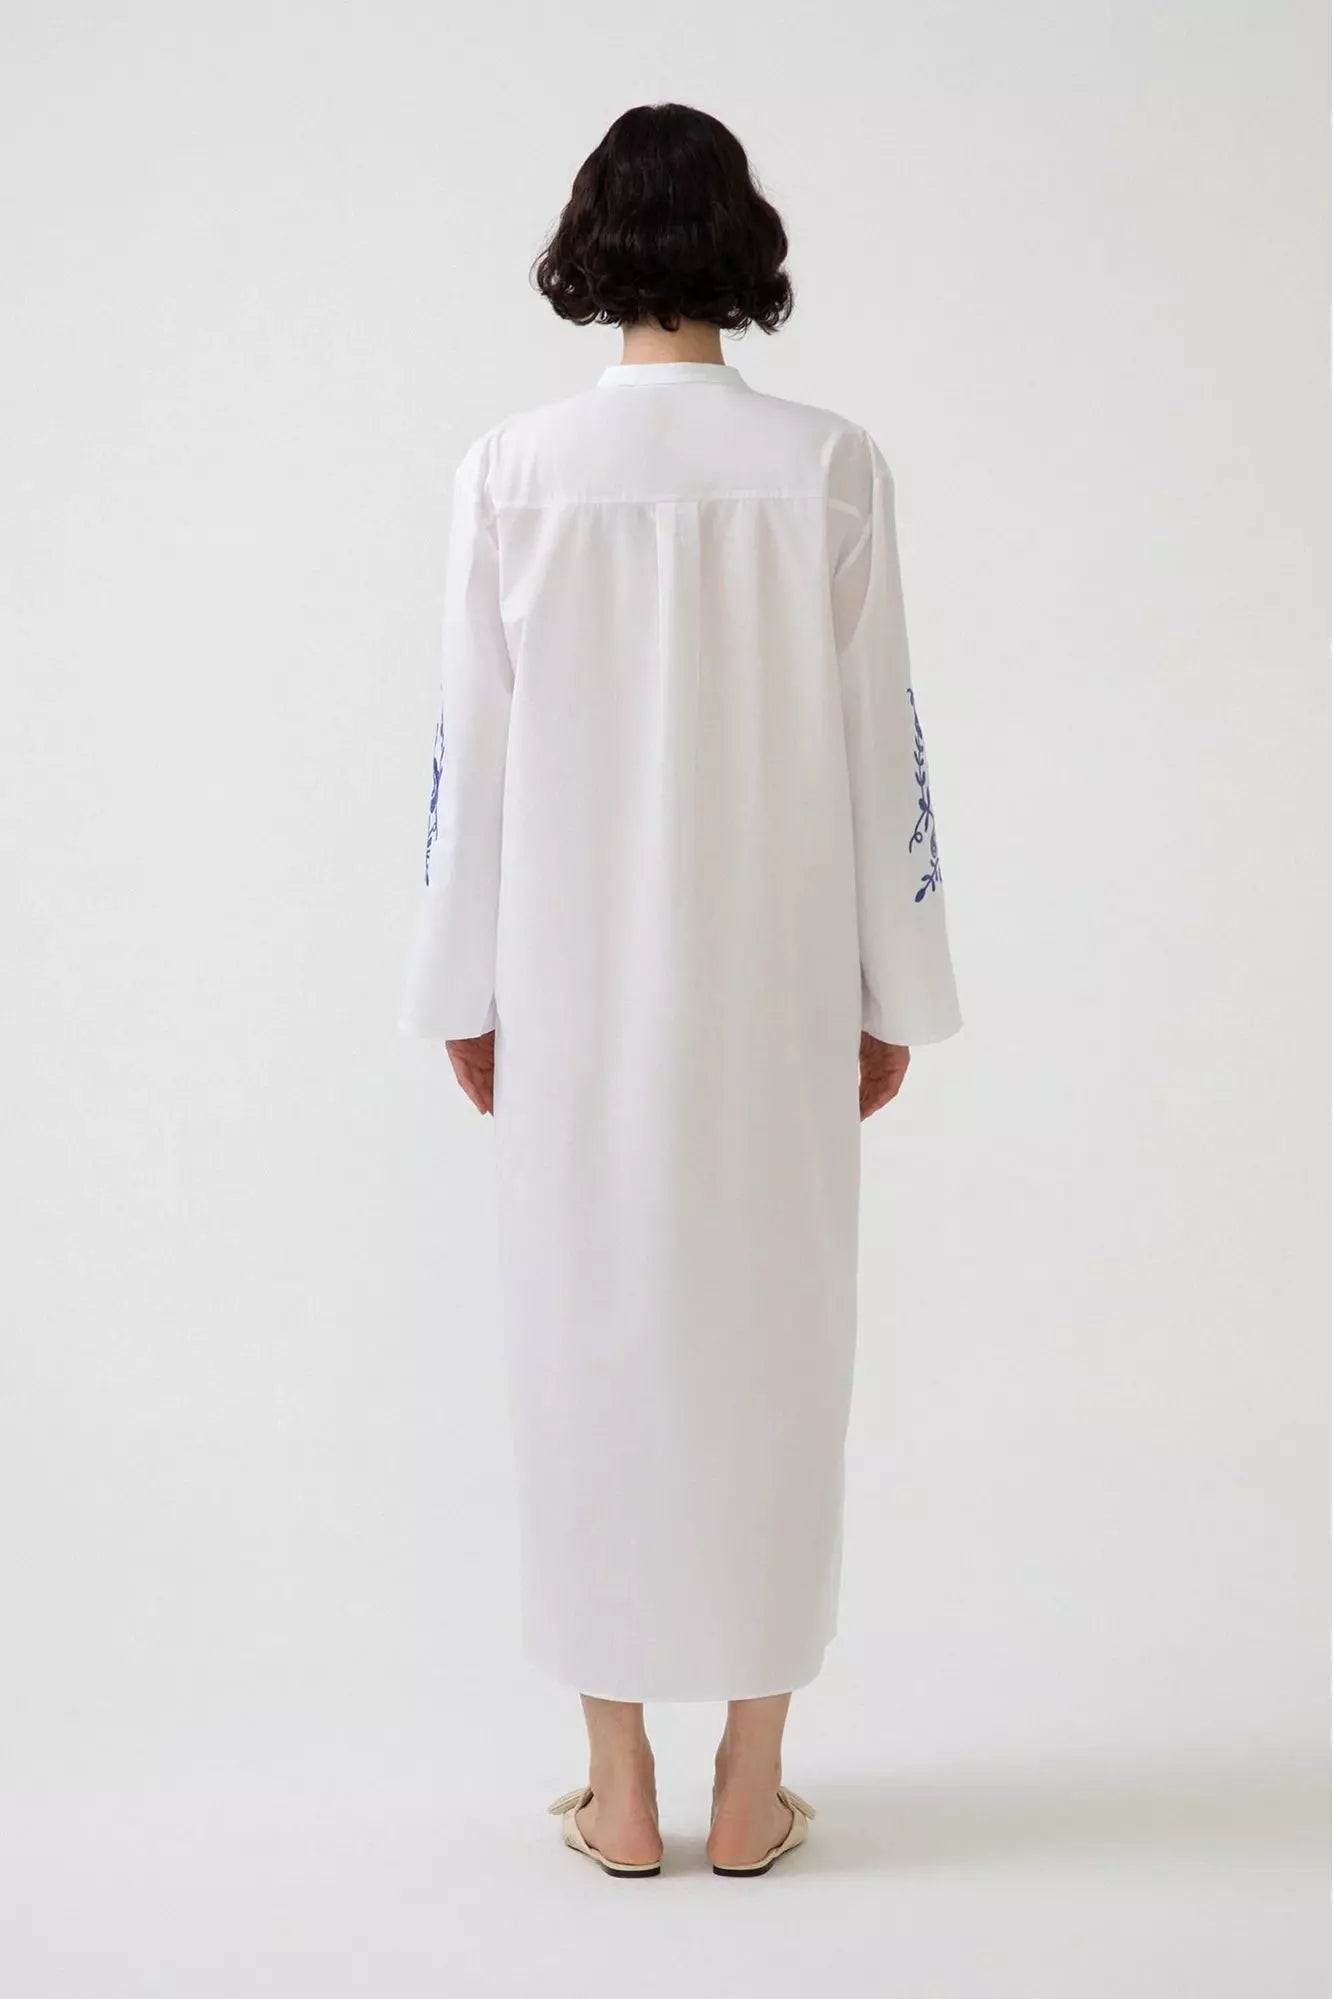 Zara White Embroidered Dress with Long Sleeve Dress By Baano   